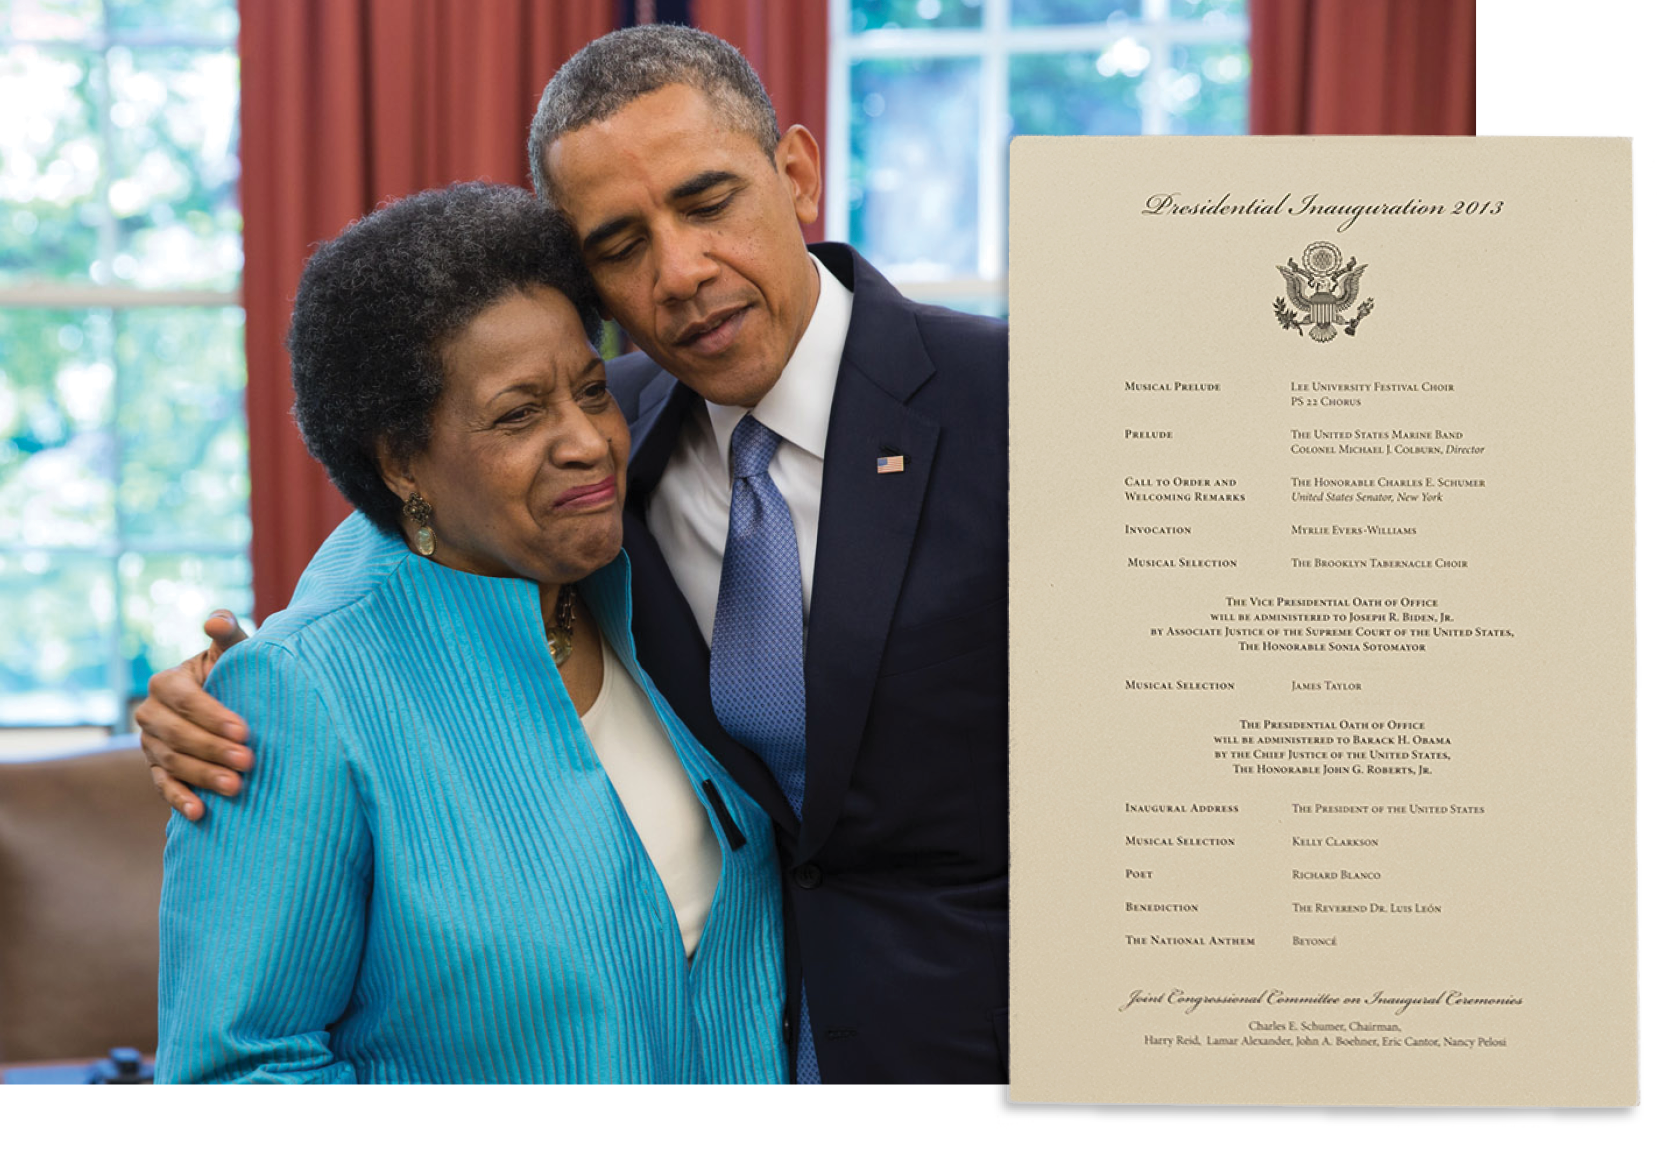 From left: President Barack Obama embraces Myrlie Evers-Williams during a visit in the Oval Office on June 4, 2013. The president met with the Evers family to commemorate the approaching 50th anniversary of Medgar Evers’ death. Photograph by Pete Souza, White House Photographs. The program from the second inauguration of President Obama in January 2013, at which Evers-Williams gave the invocation.